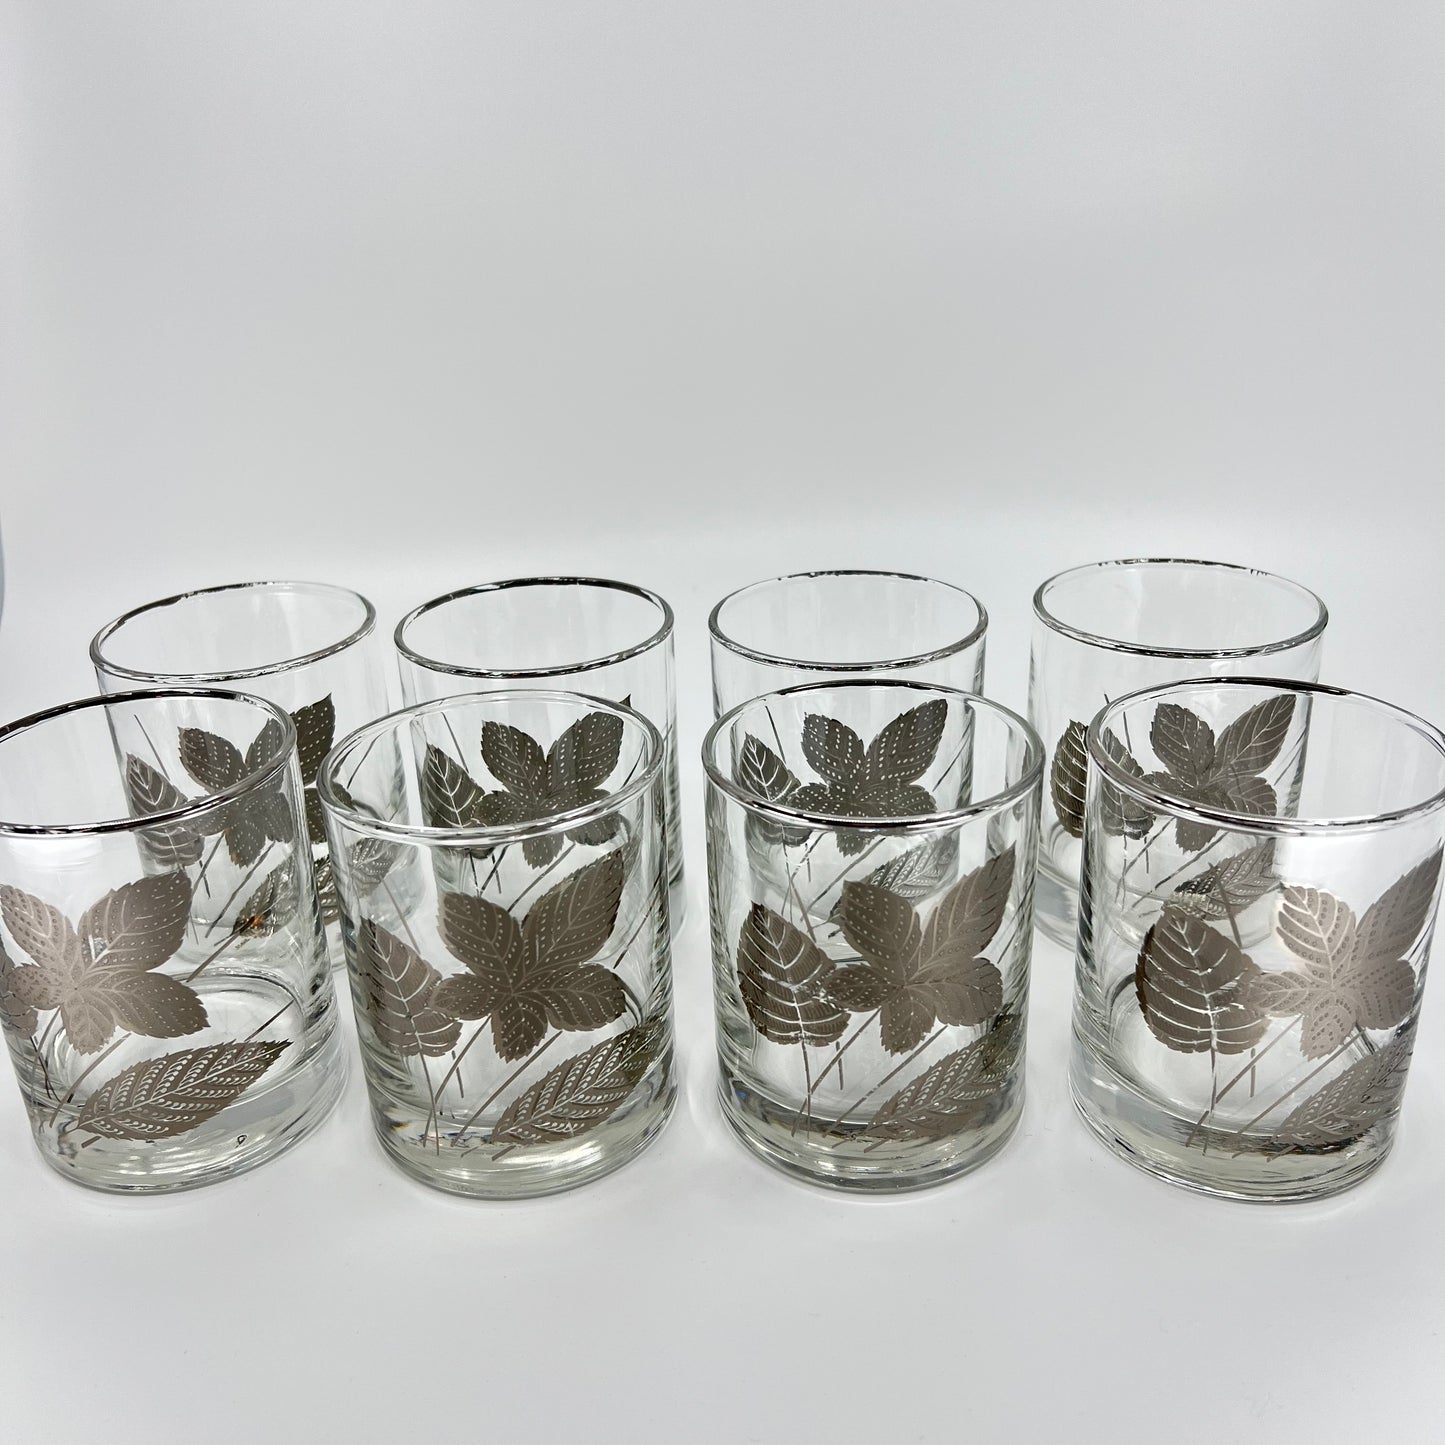 Leaf Lowballs with Caddy (Set of 8)